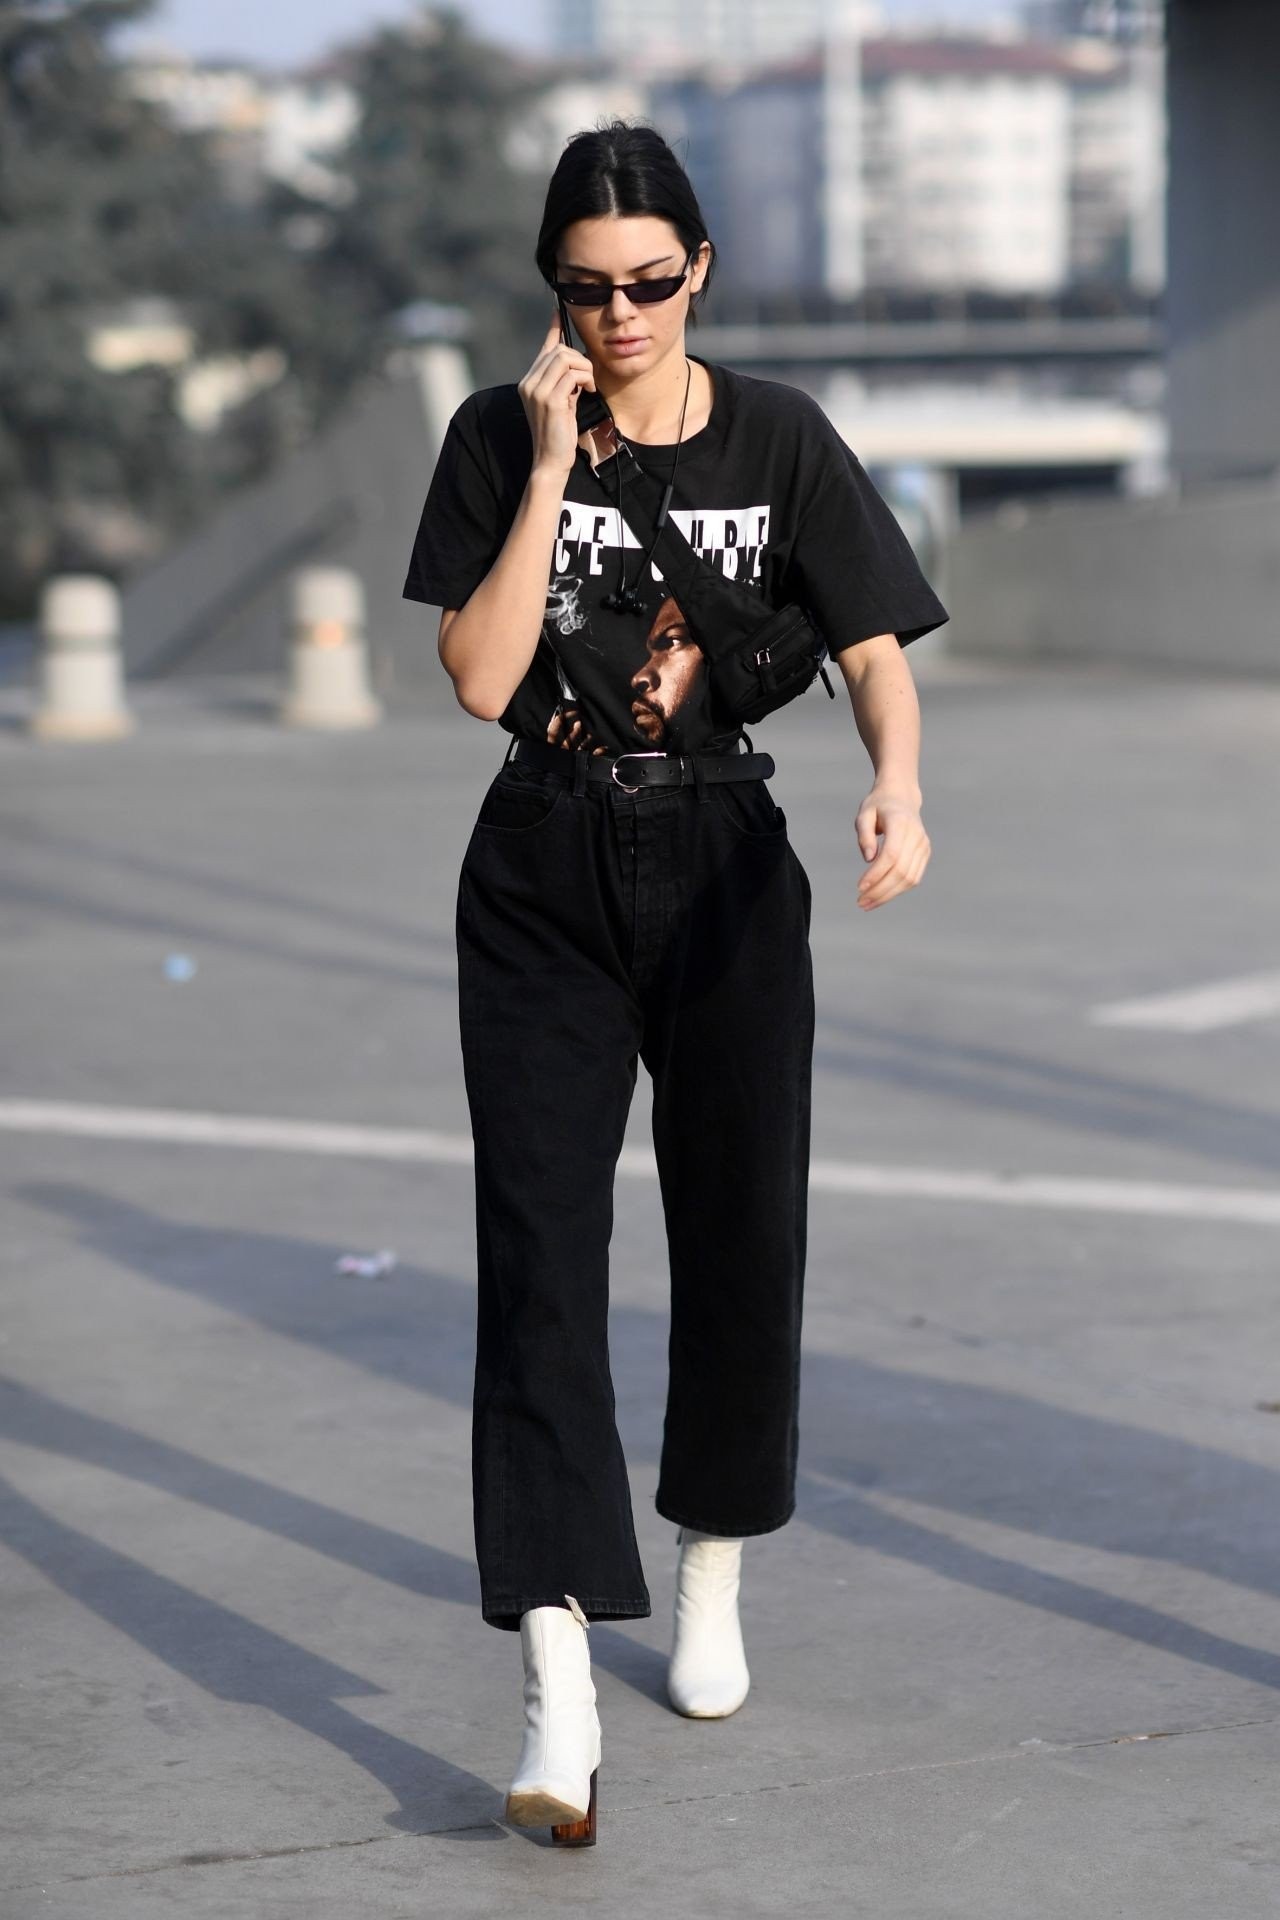 kendall-jenner-total-black-outfit.jpg